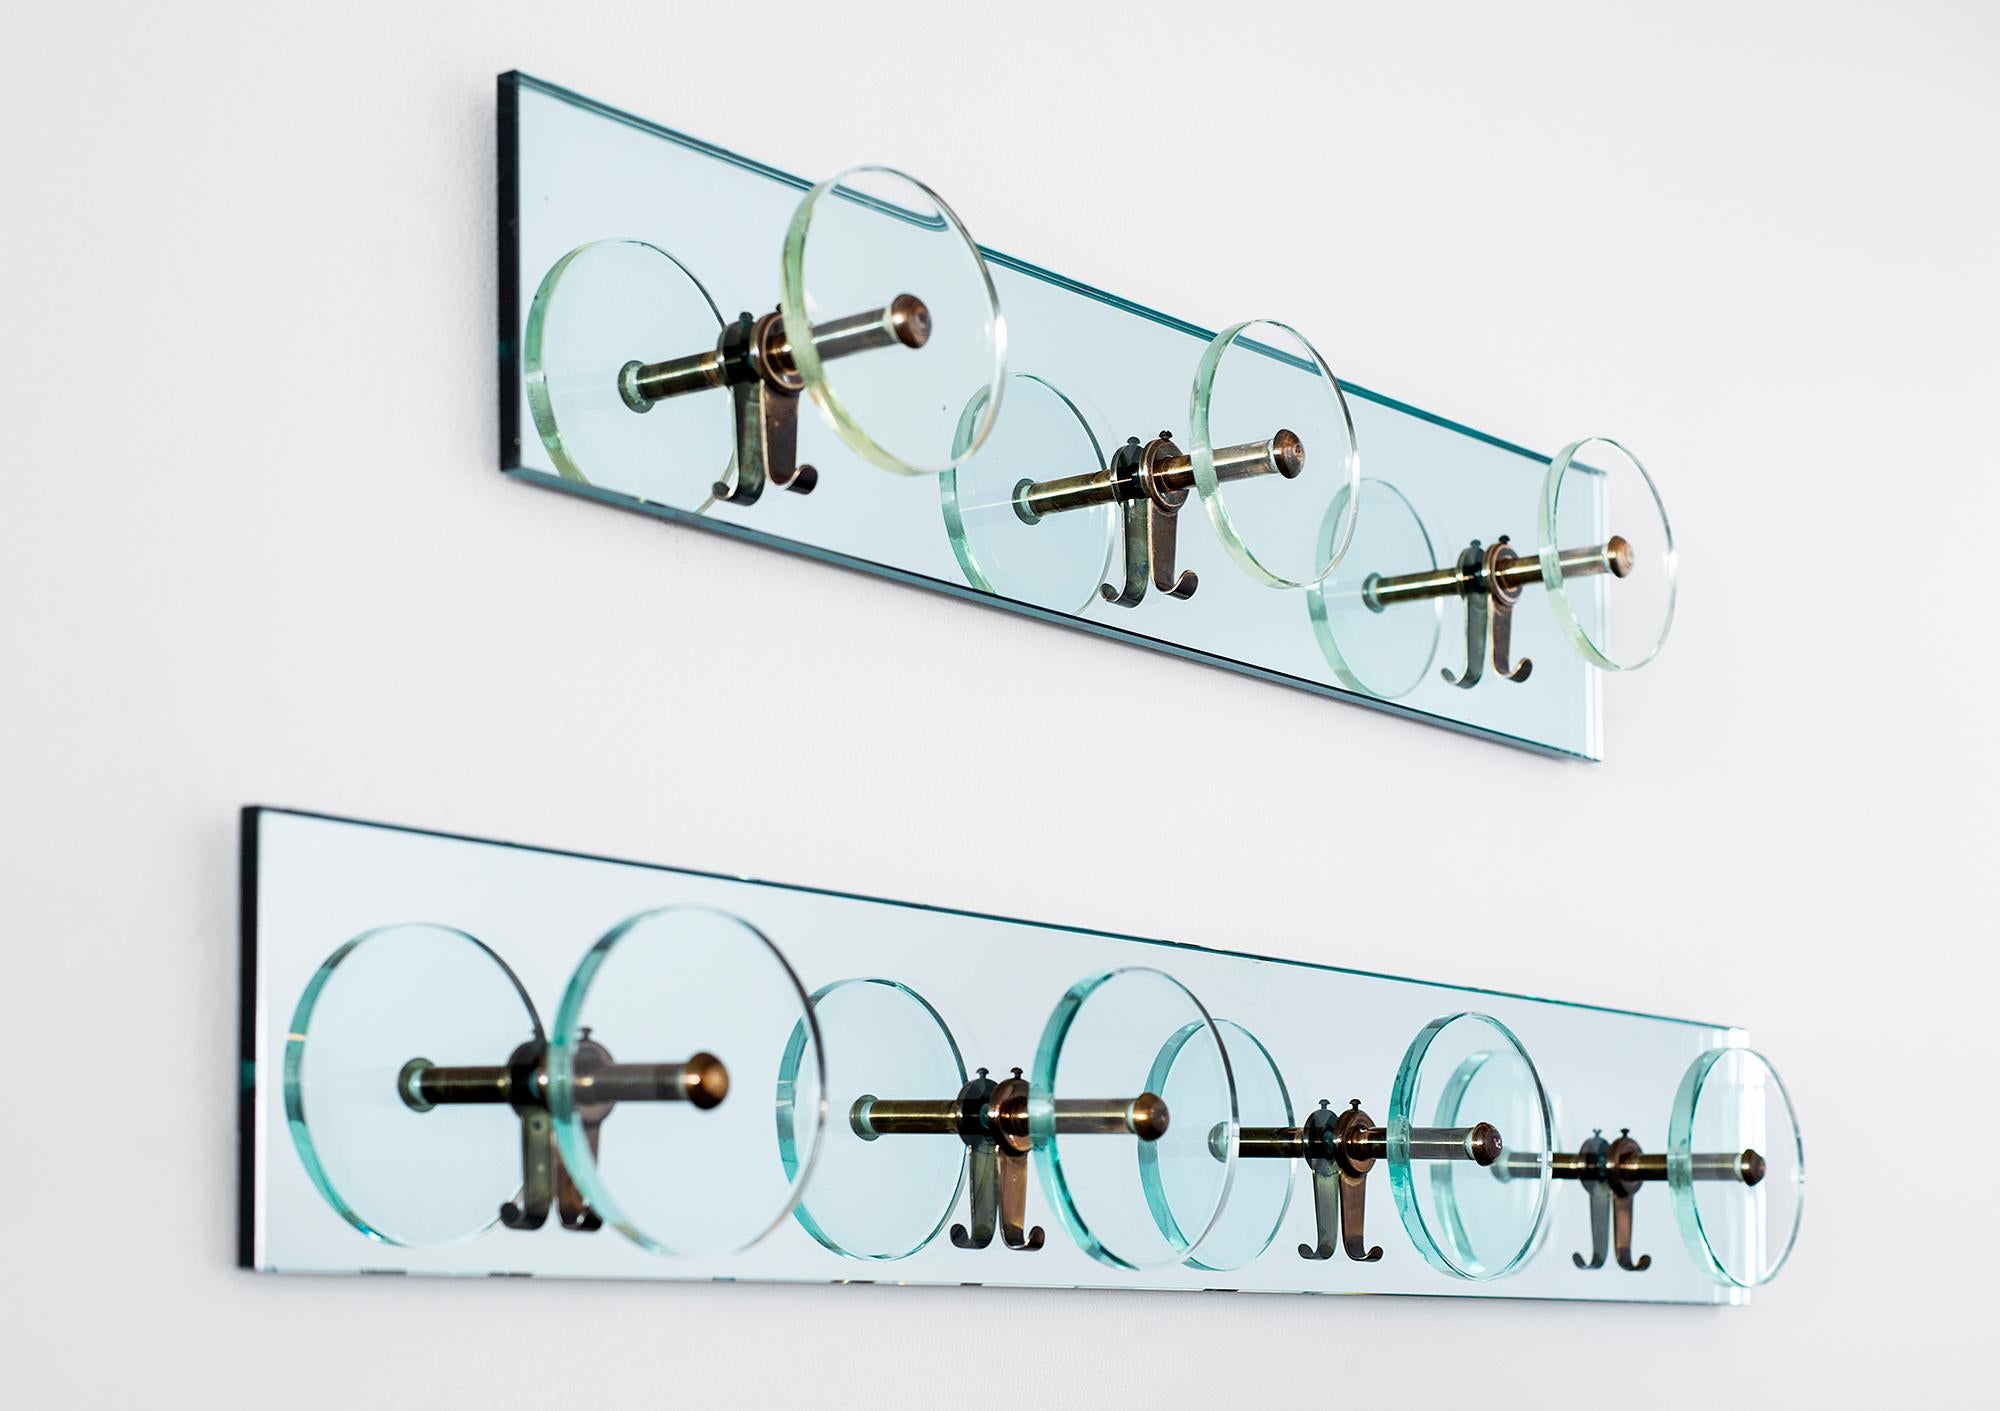 Italian glass coatracks by Cristal Art.
Glass circular discus with brass hardware mounted on mirror. 

Sold and priced individually. 

Smaller size - 27.75